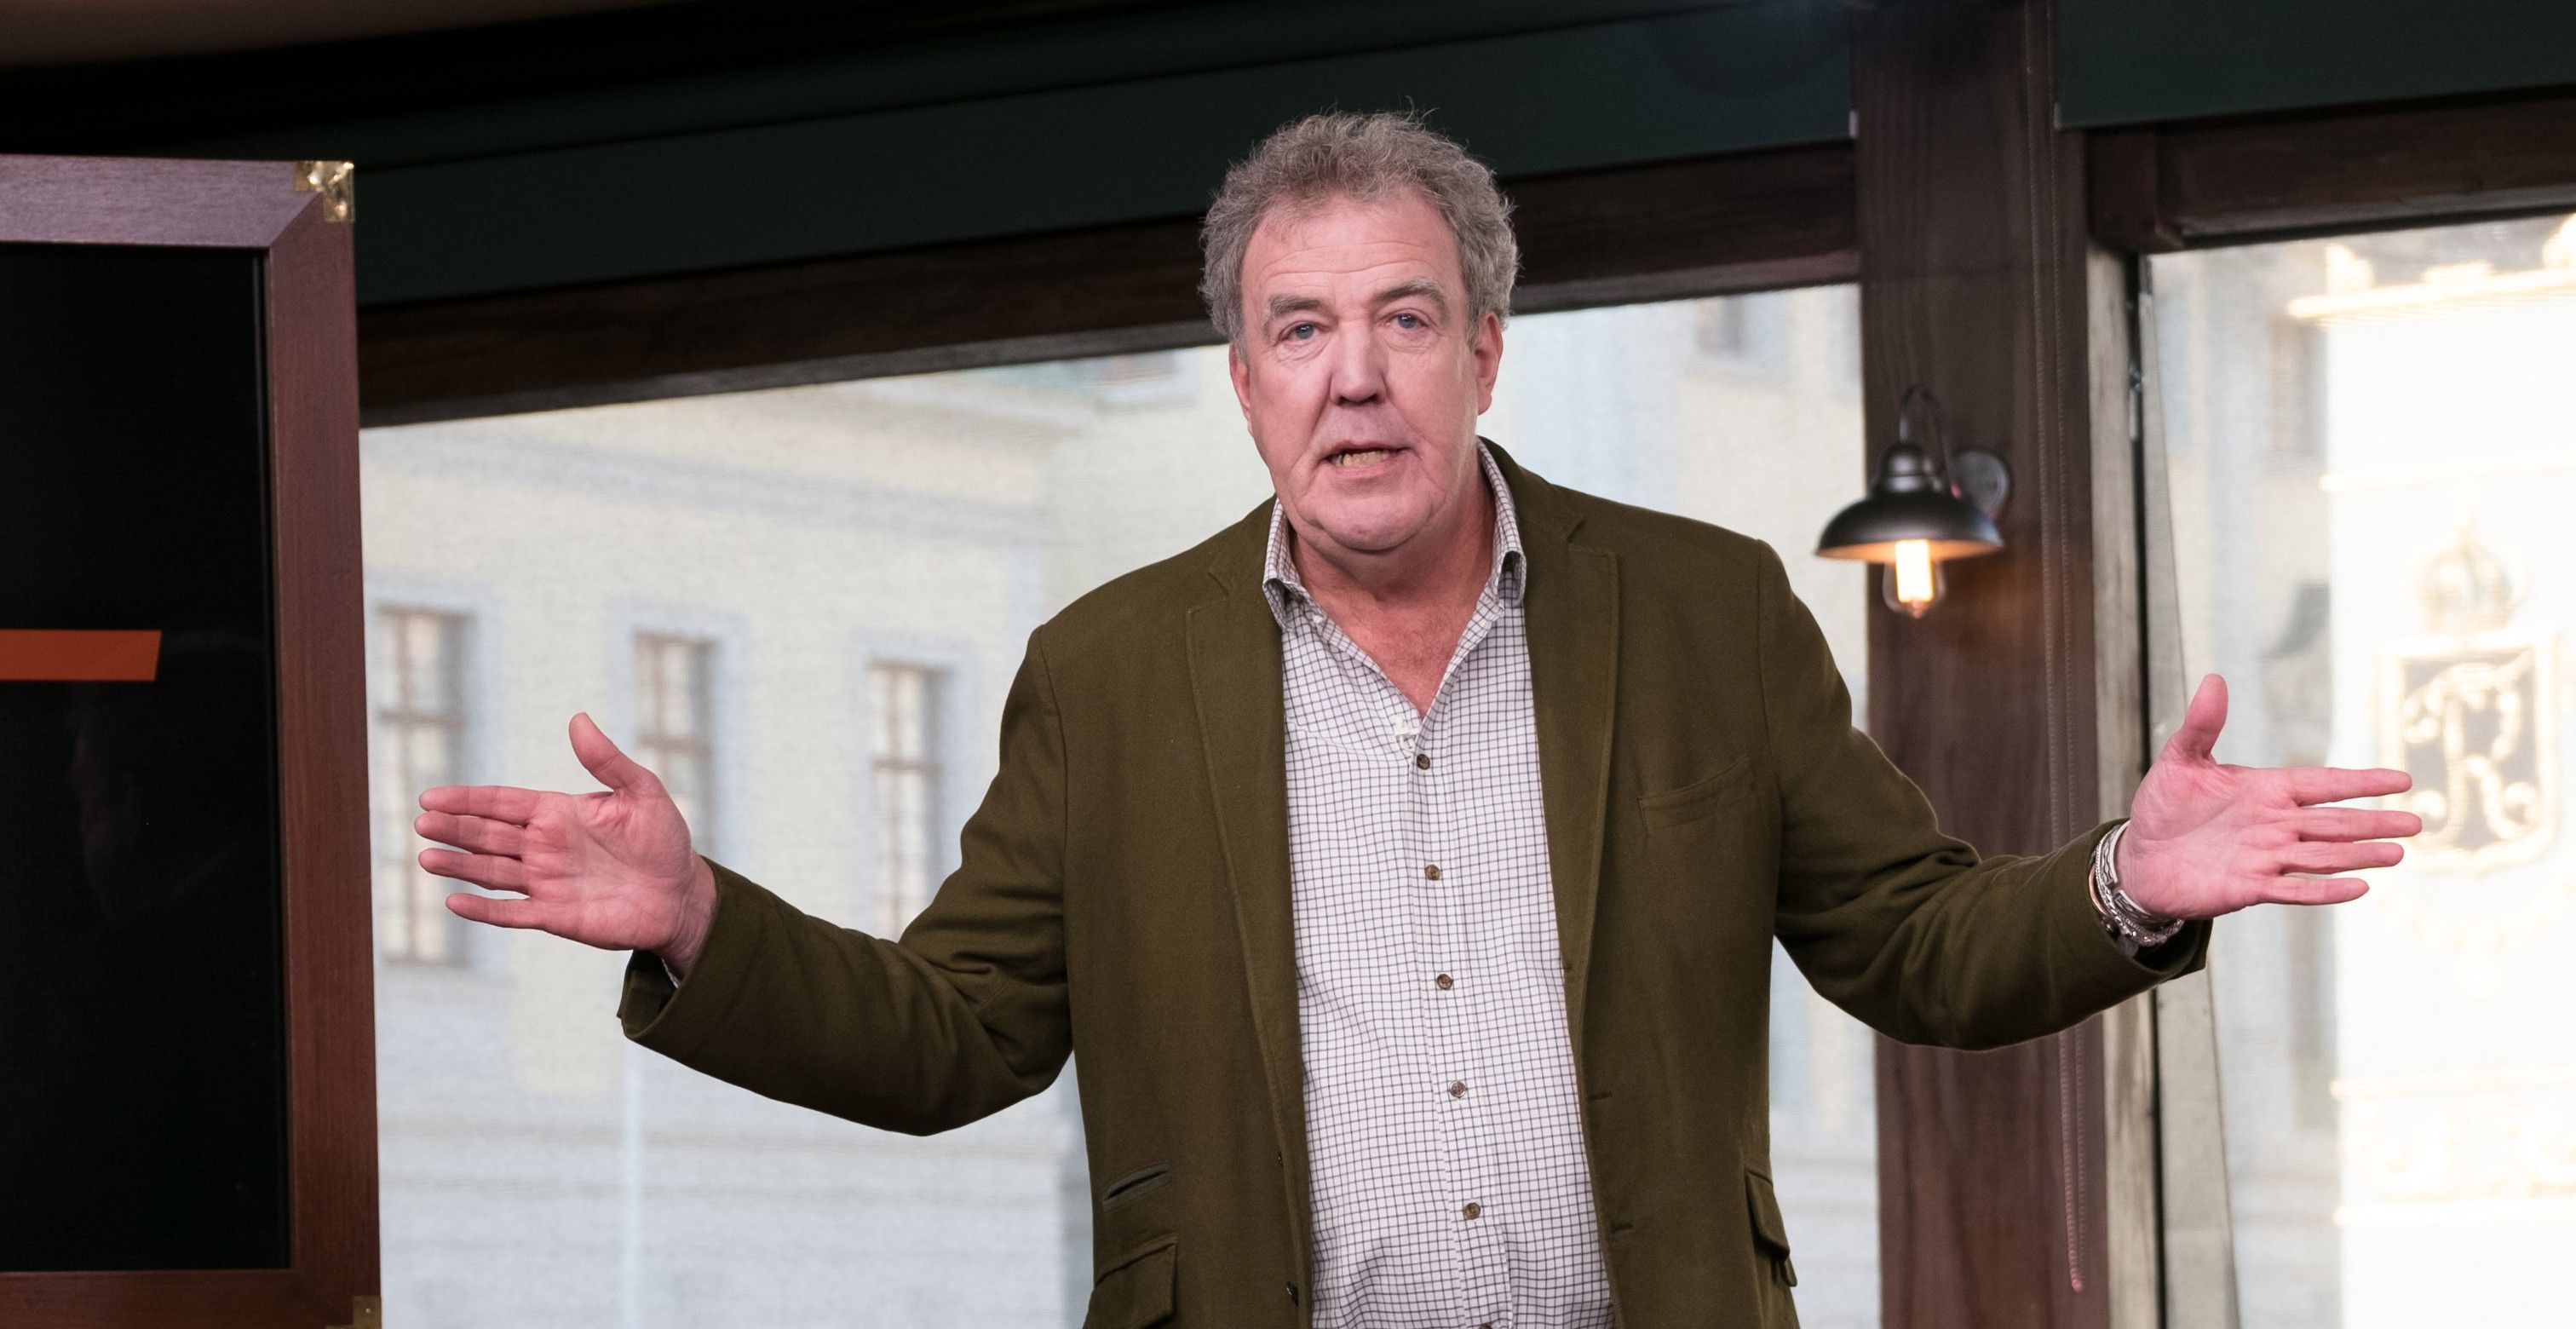 Jeremy Clarkson is shrugging his arms in the Grand Tour studio